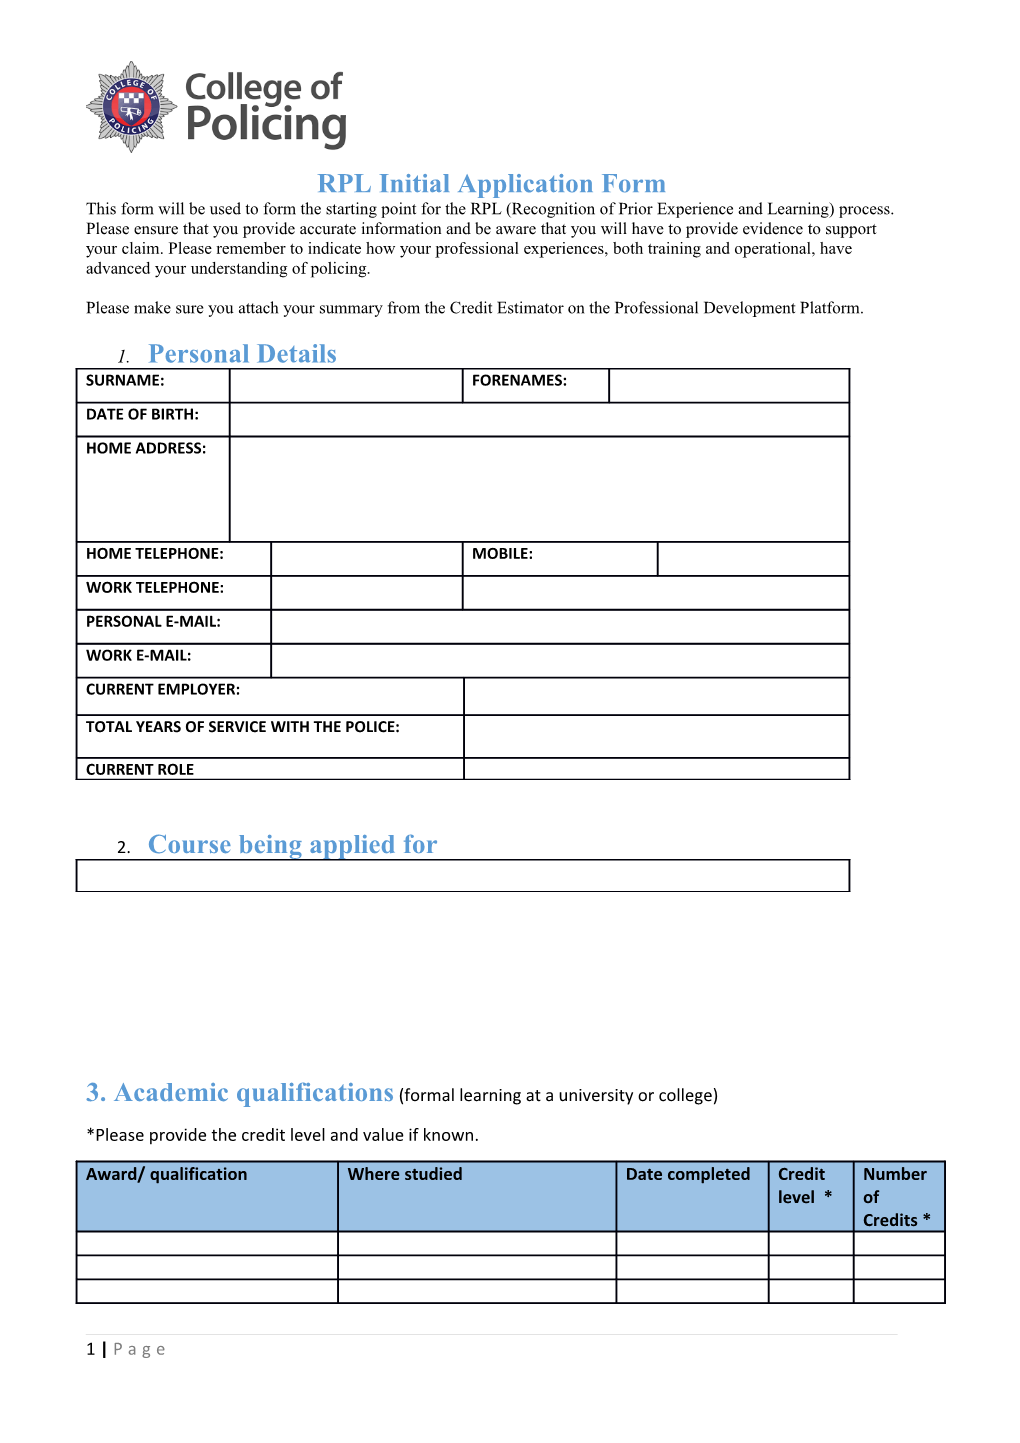 RPL Initial Application Form